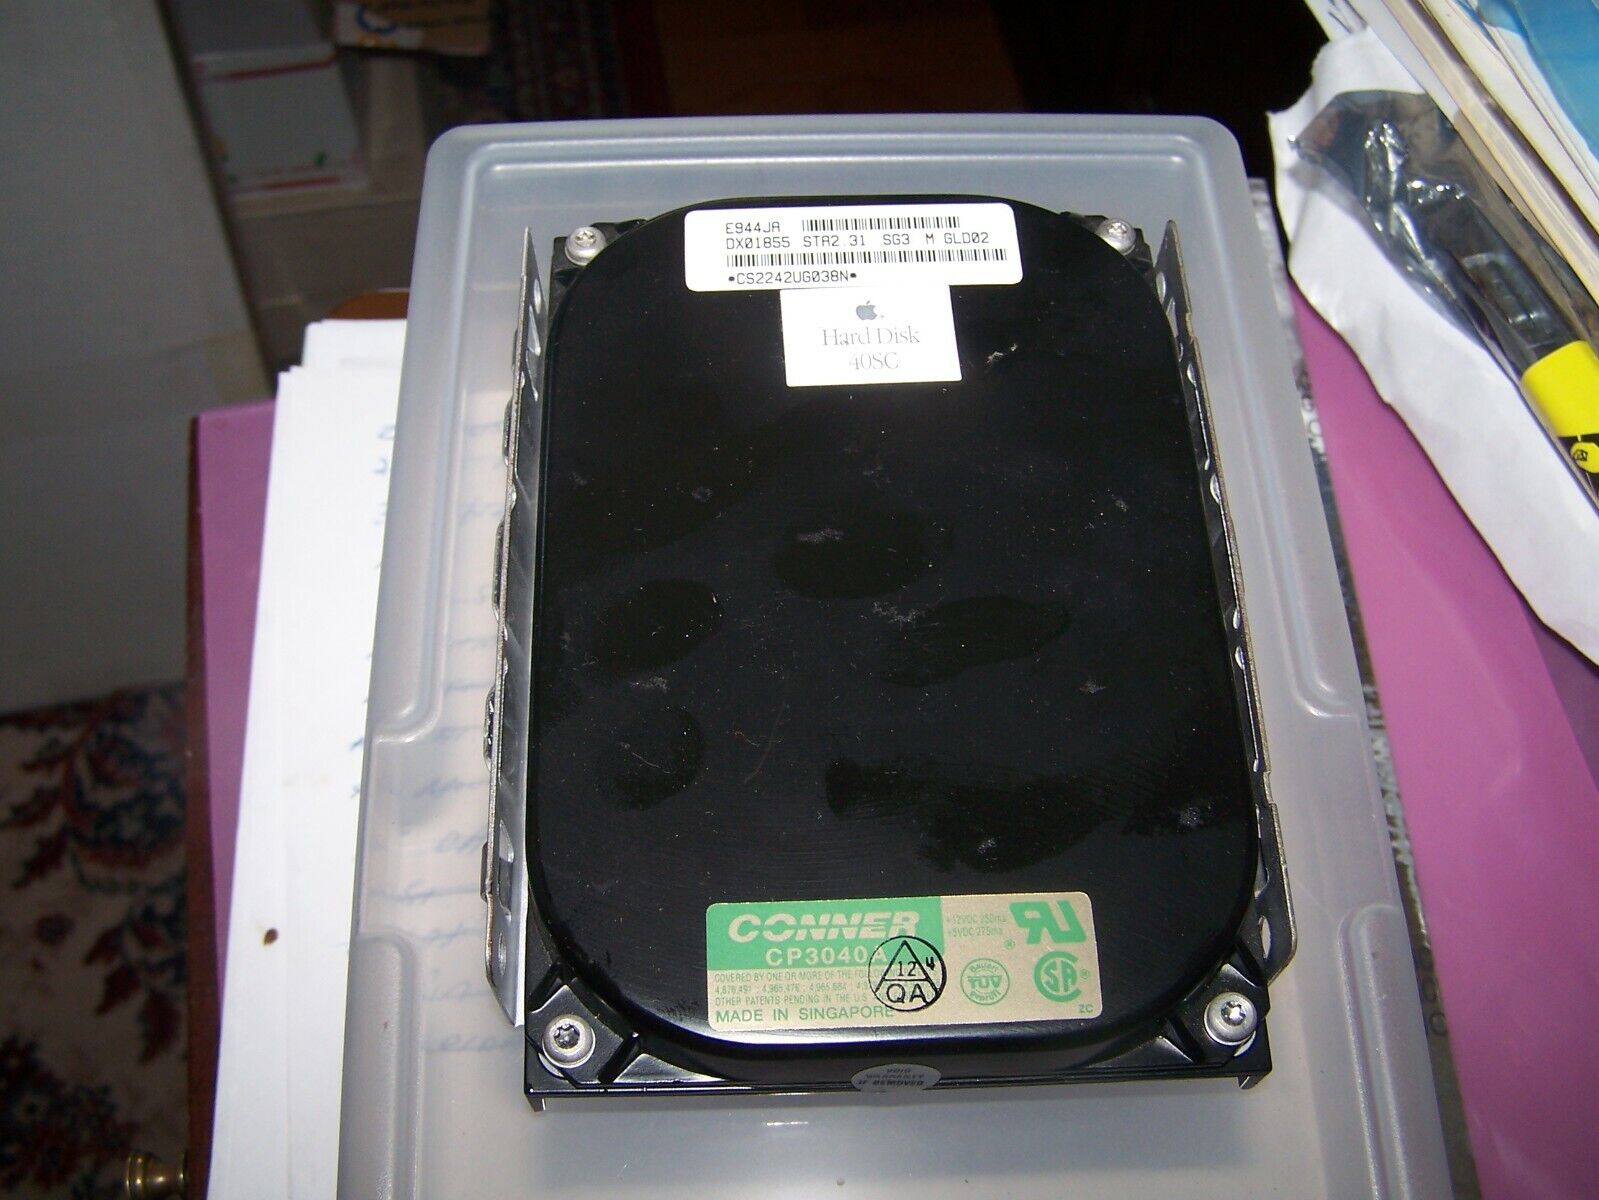 Apple Macintosh Conner CP3040A 40MB Internal Hard Drive with System 7.1